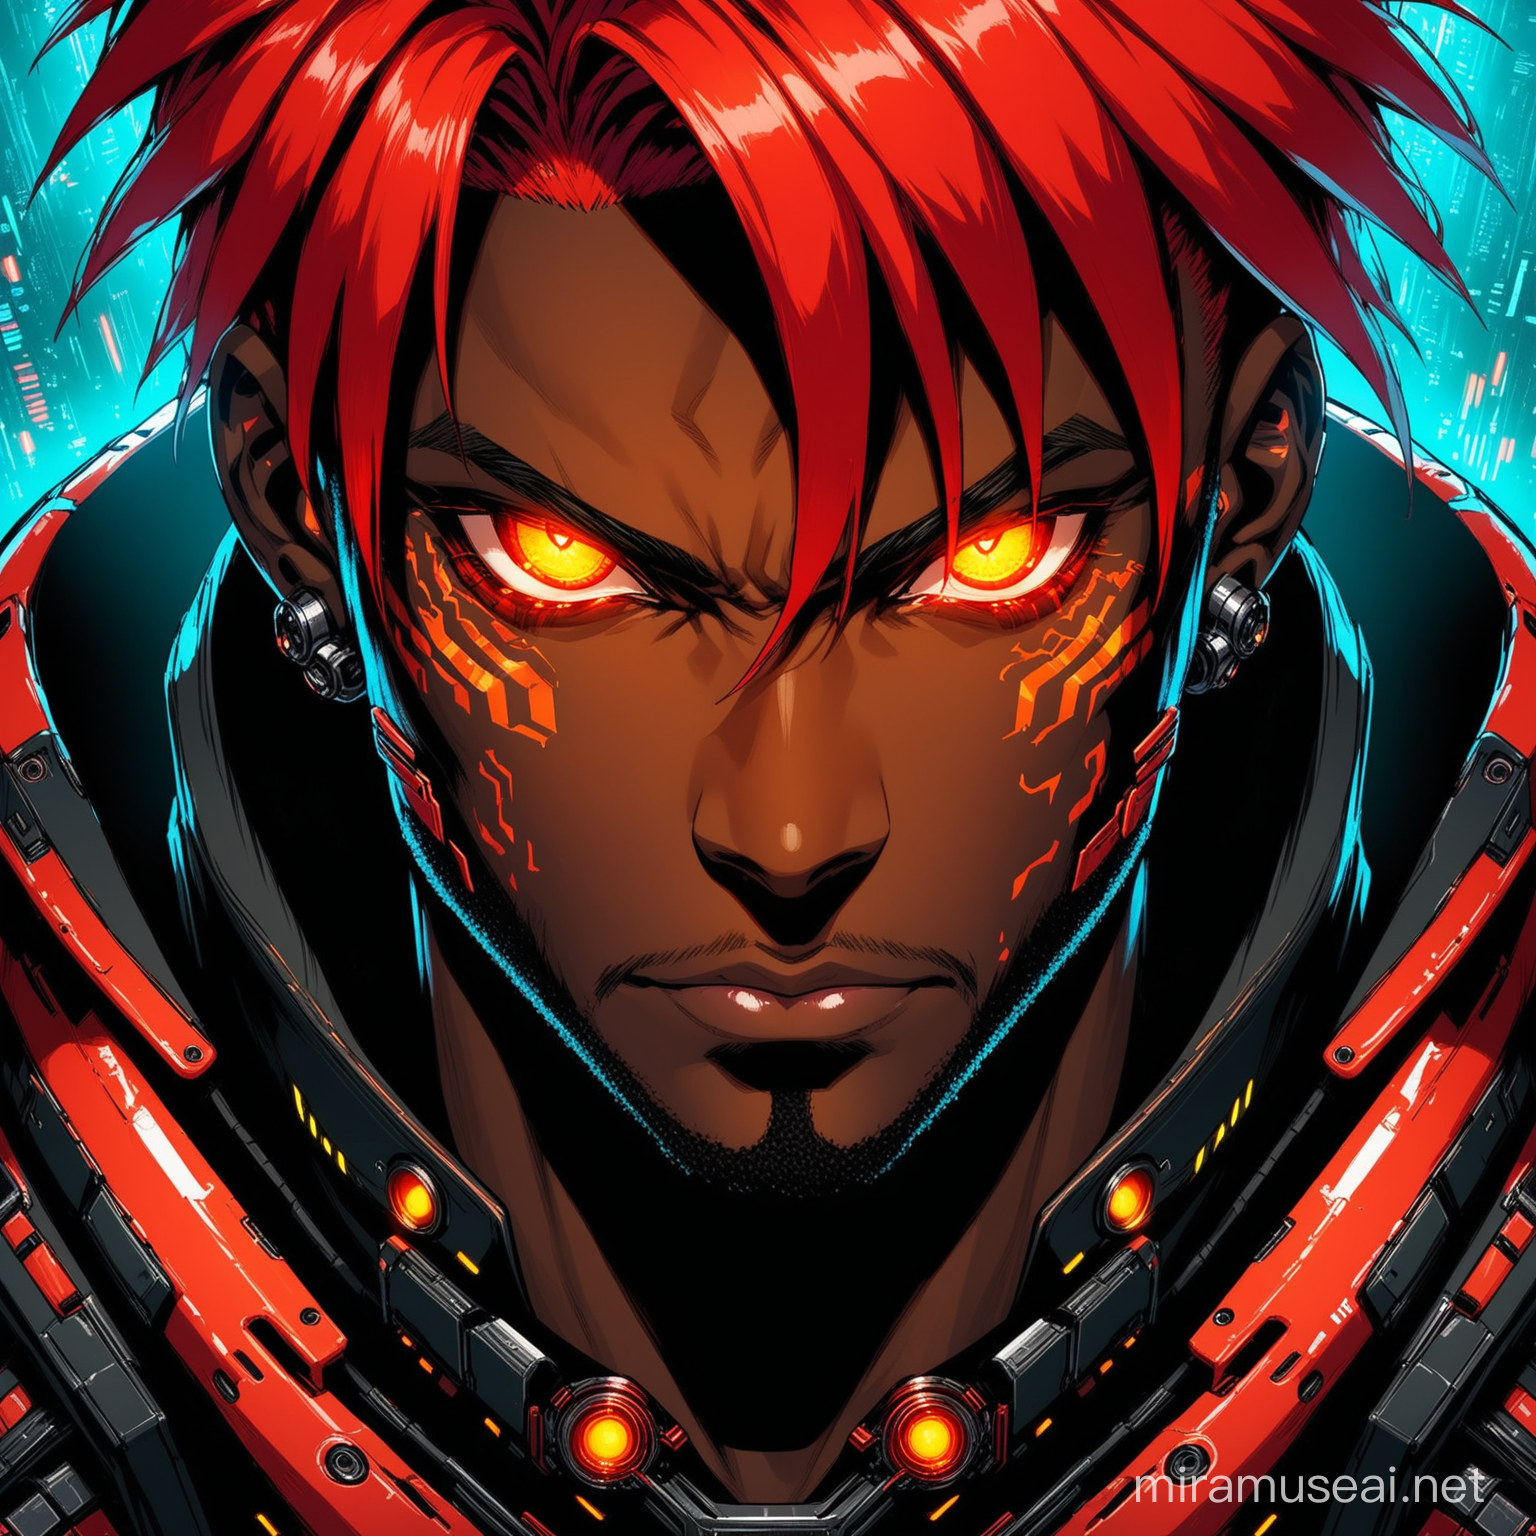 Fiery RedHaired Cyberpunk Man with Piercing Snake Eyes